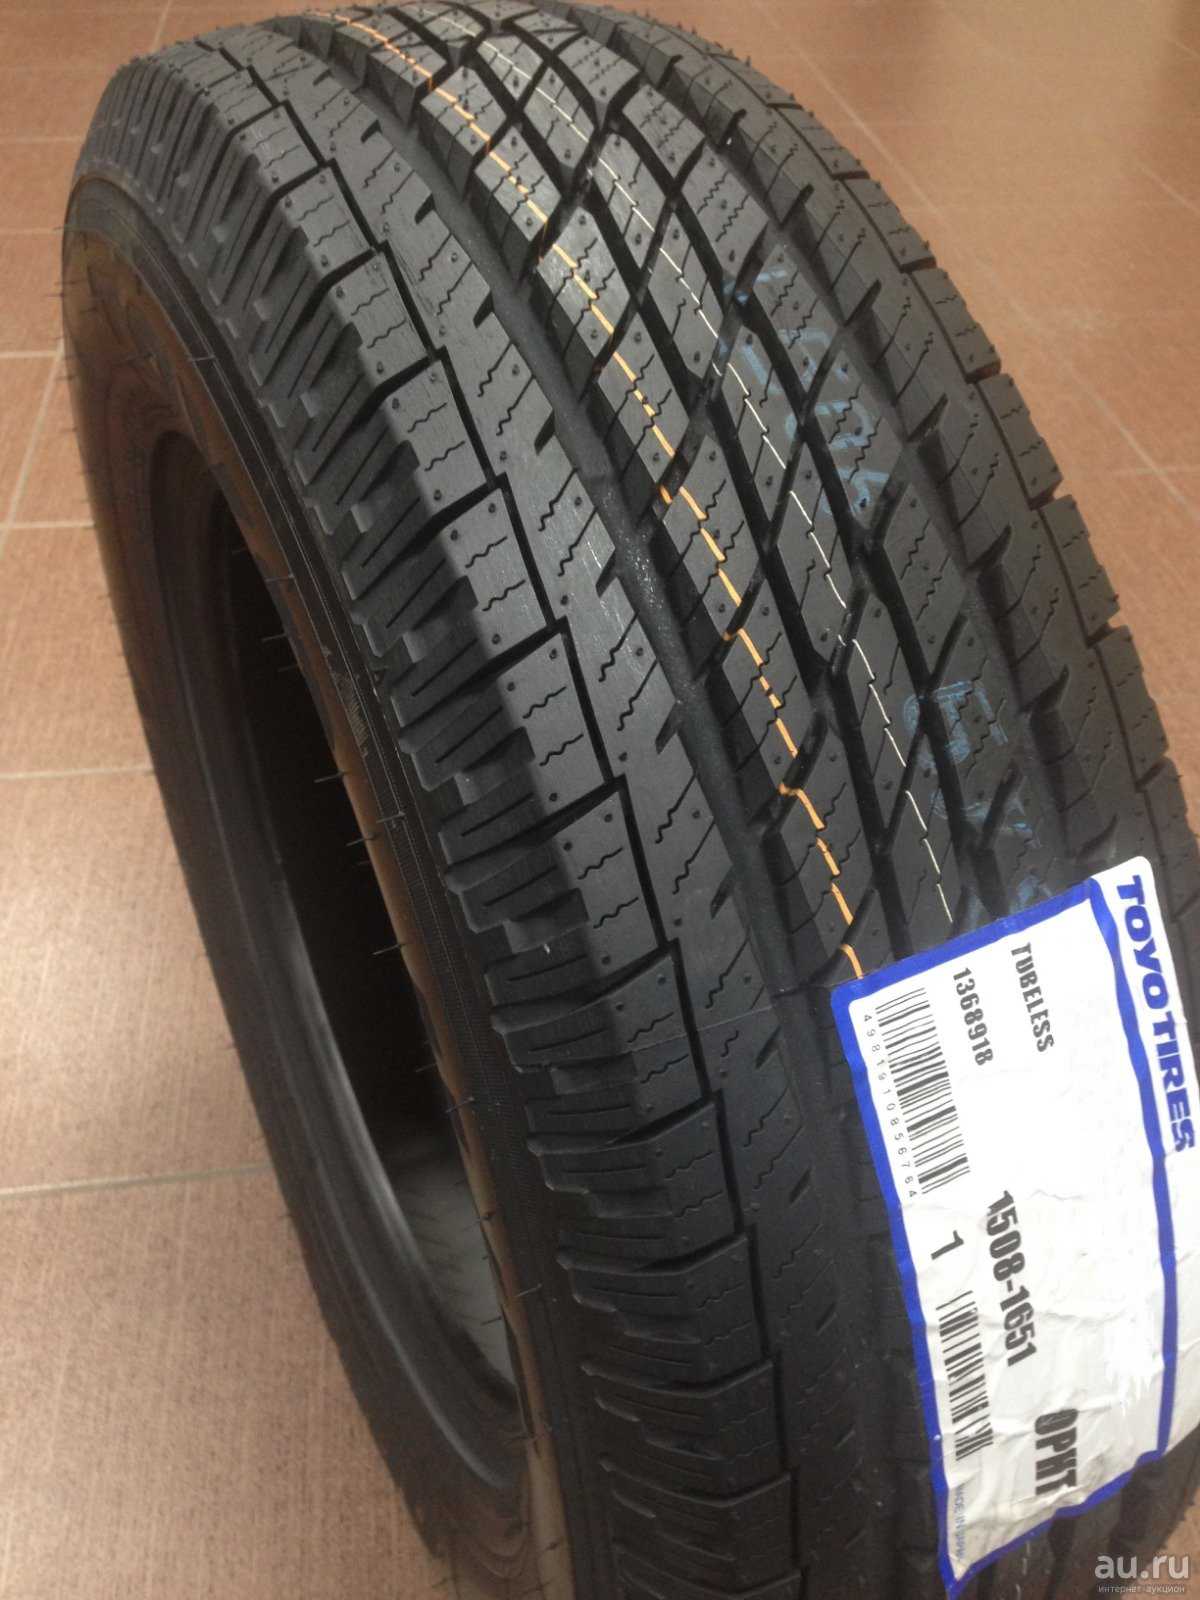 Open country отзывы. Toyo open Country h/t 255/55/19. 215/65r16 Тойо опен Кантри НТ. Toyo HT open Country. 245/55r19 Toyo OPHT 103s.